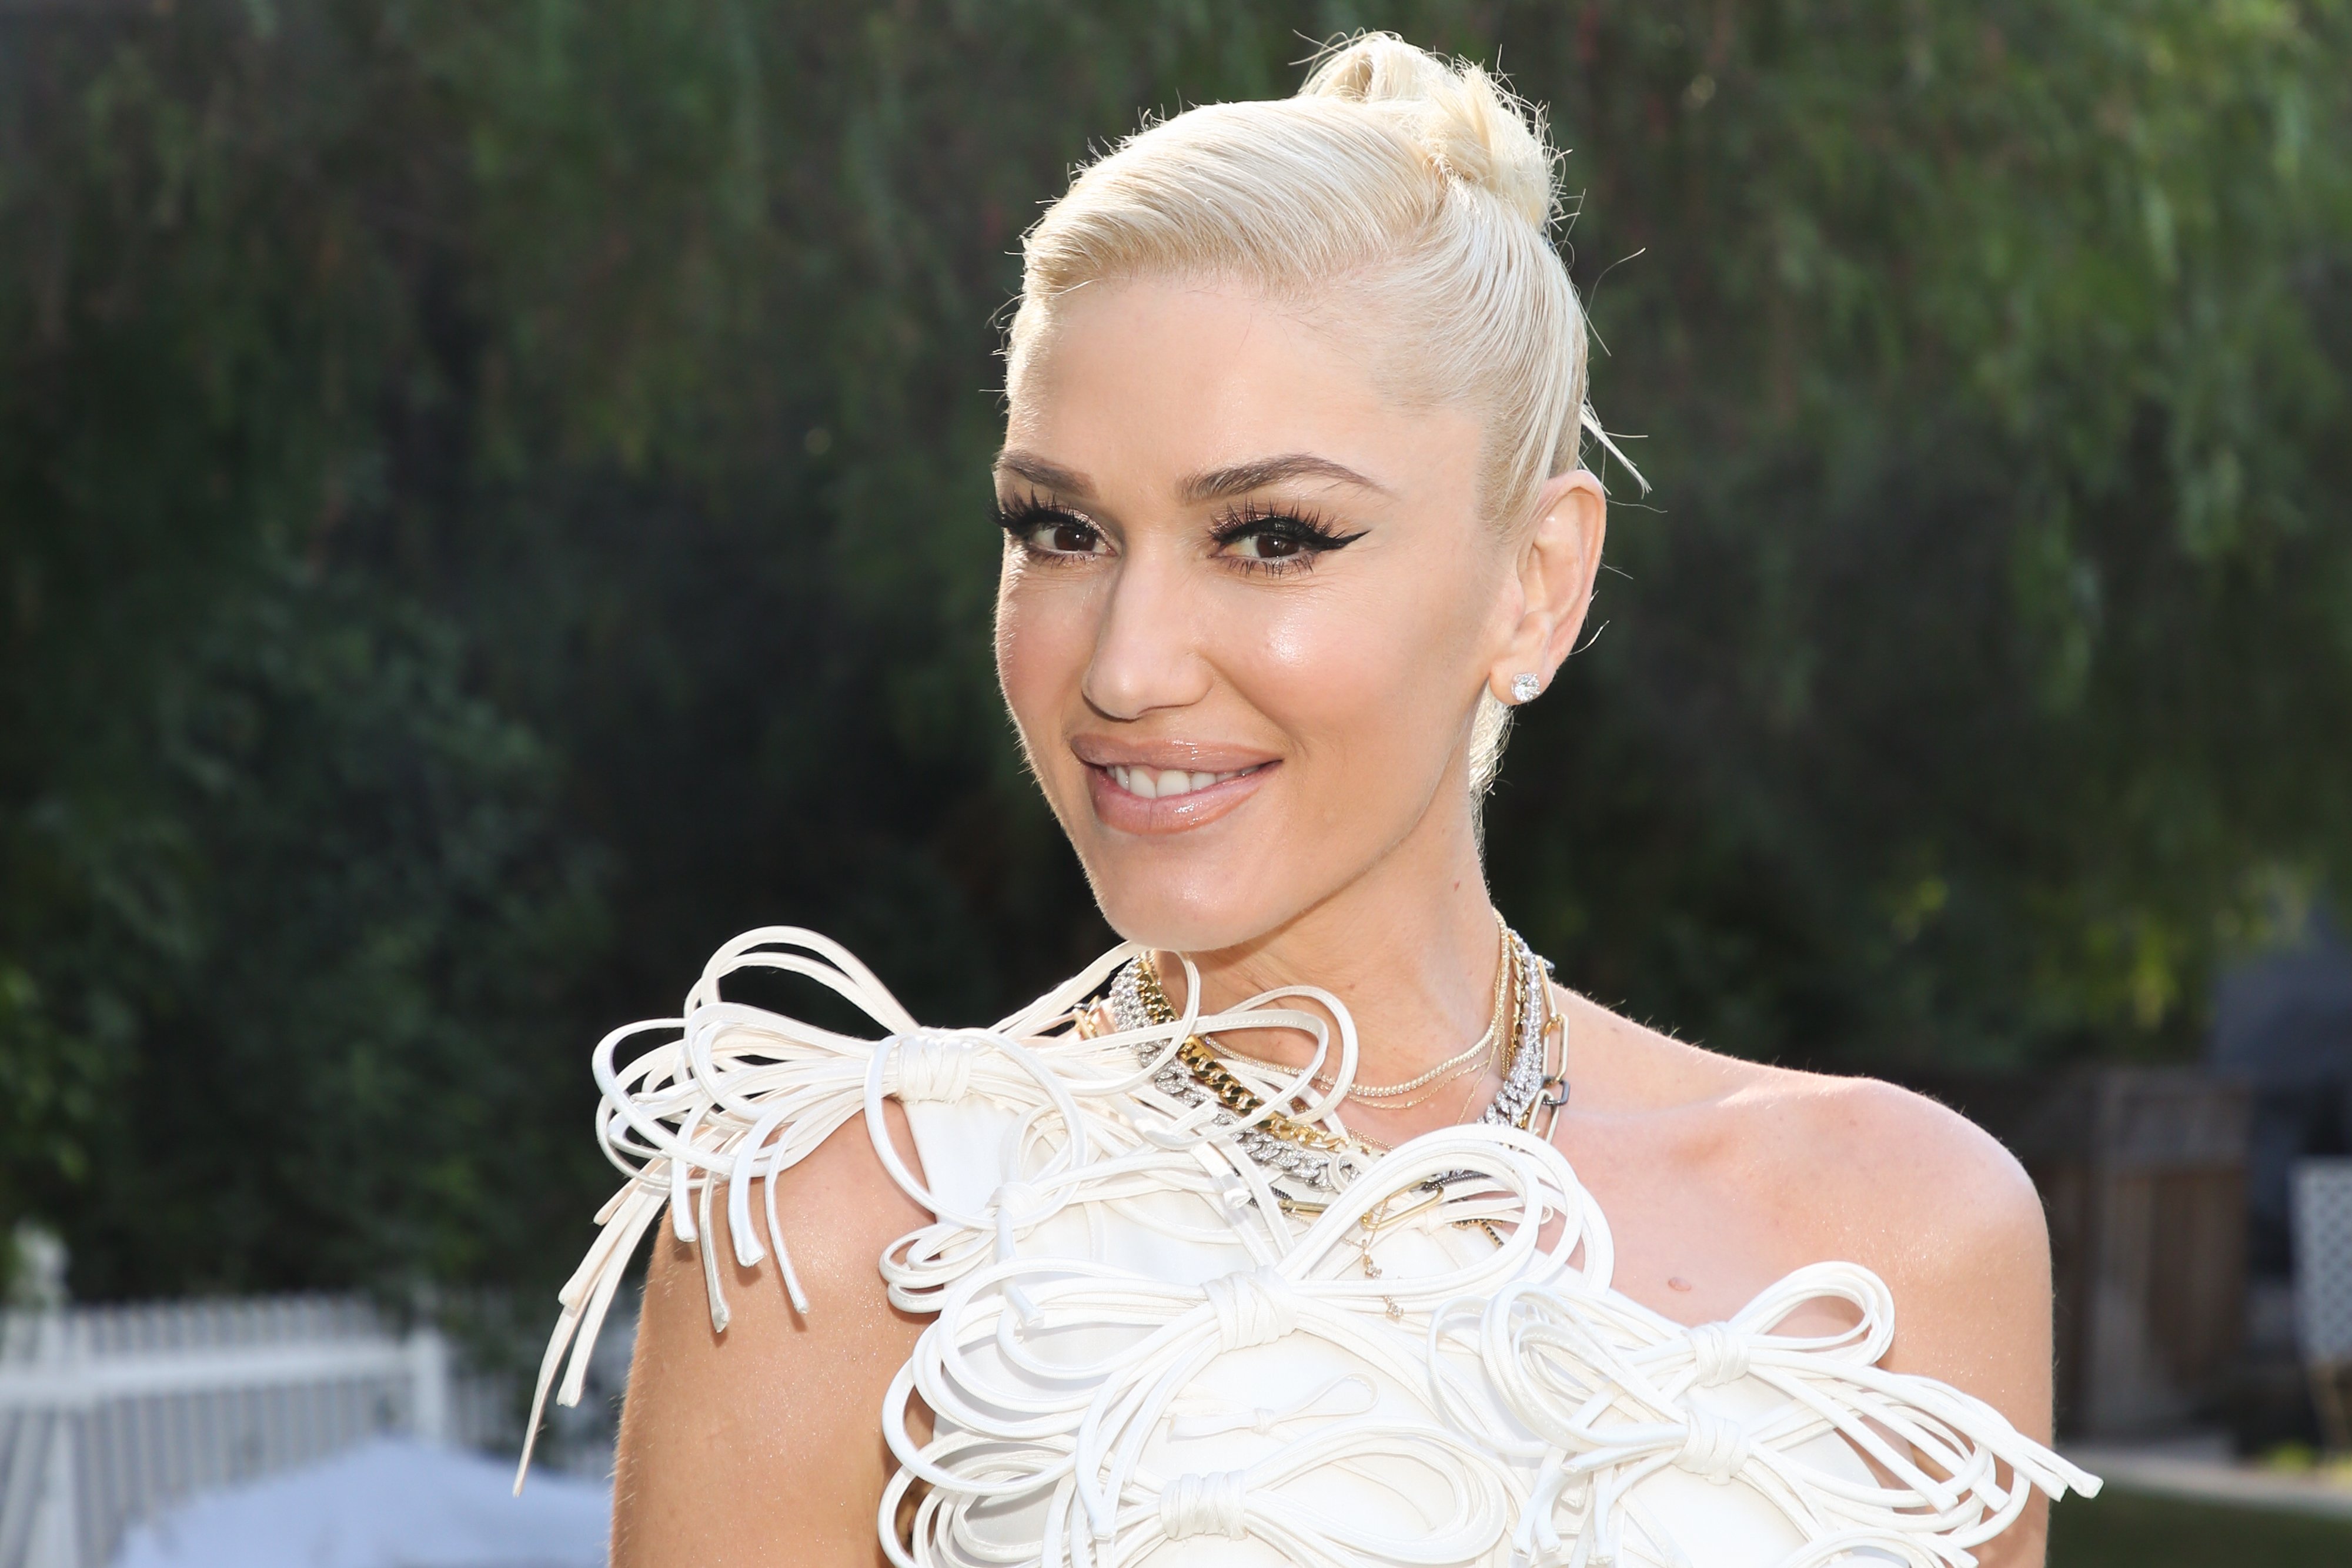 Gwen Stefani in California 2020. | Source: Getty Images